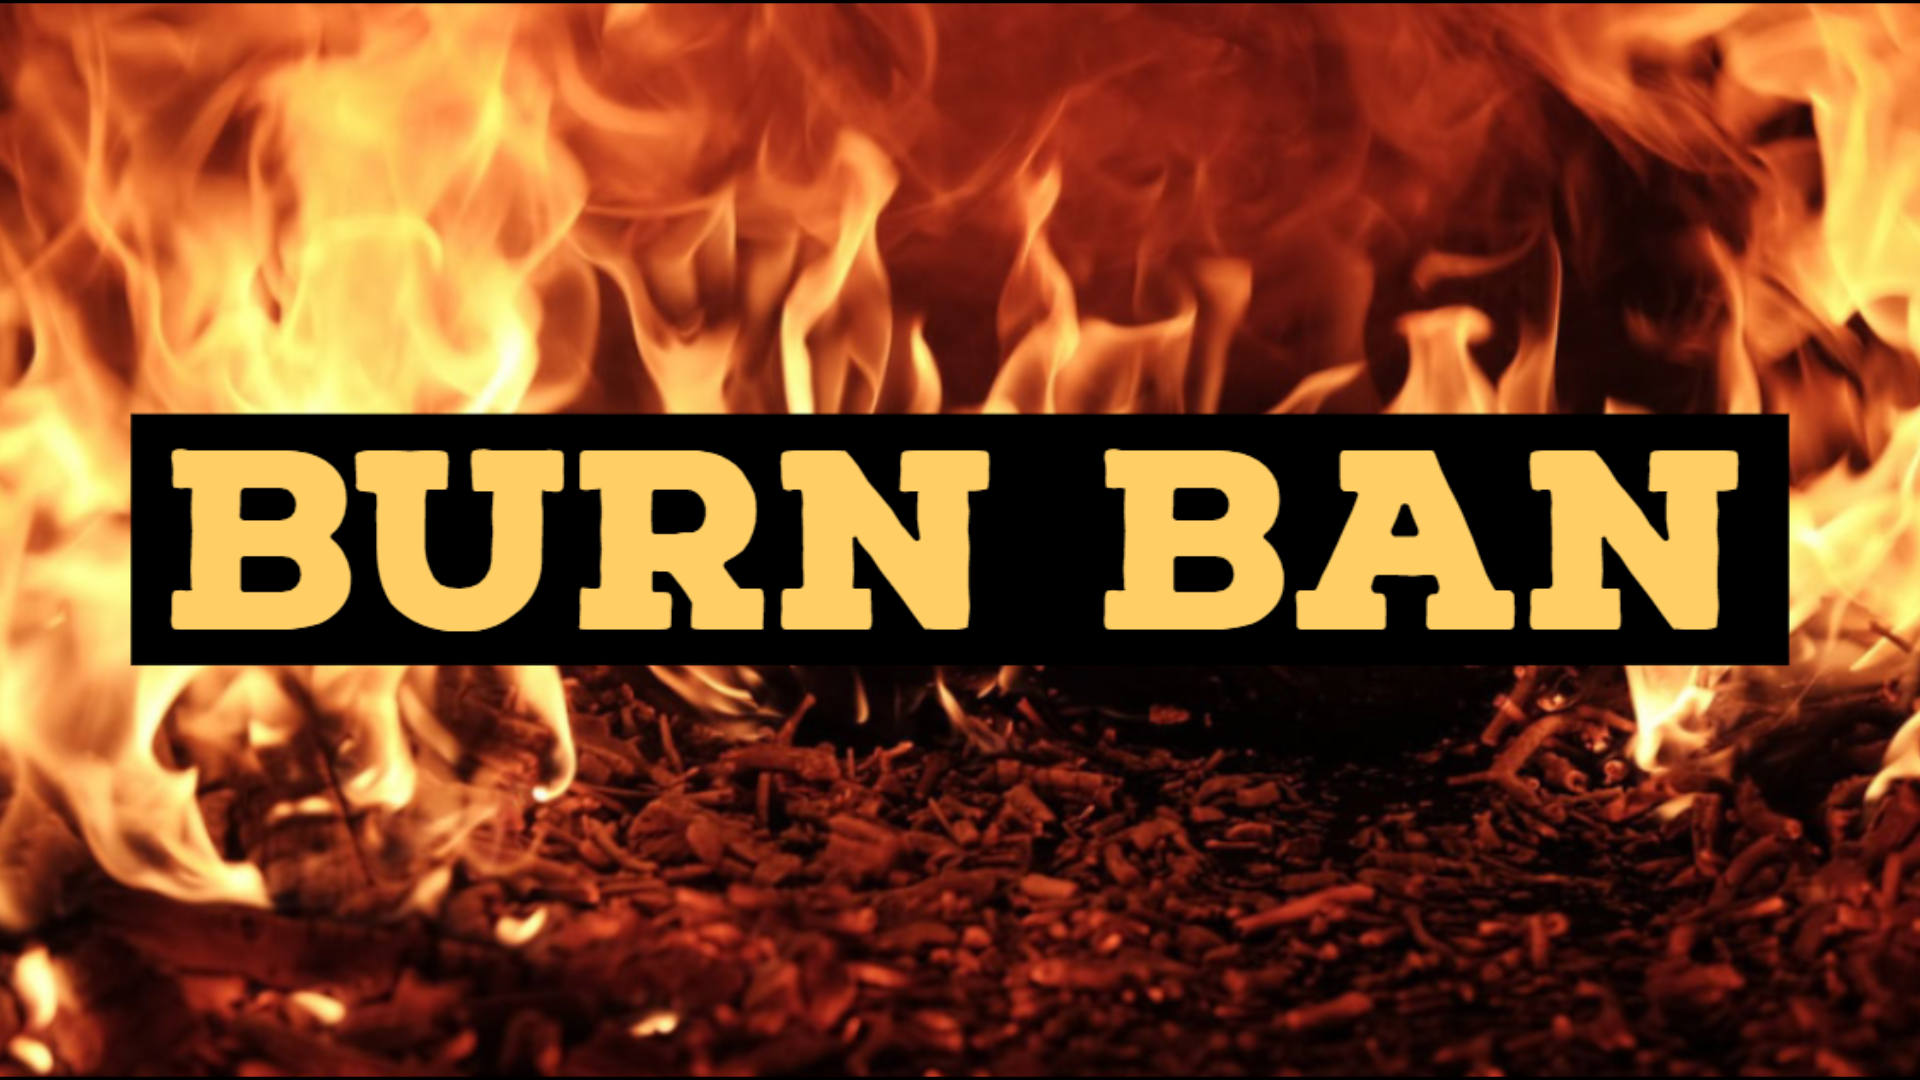 The decision to end the burn ban was made because of the recent rain and forecasted weather.